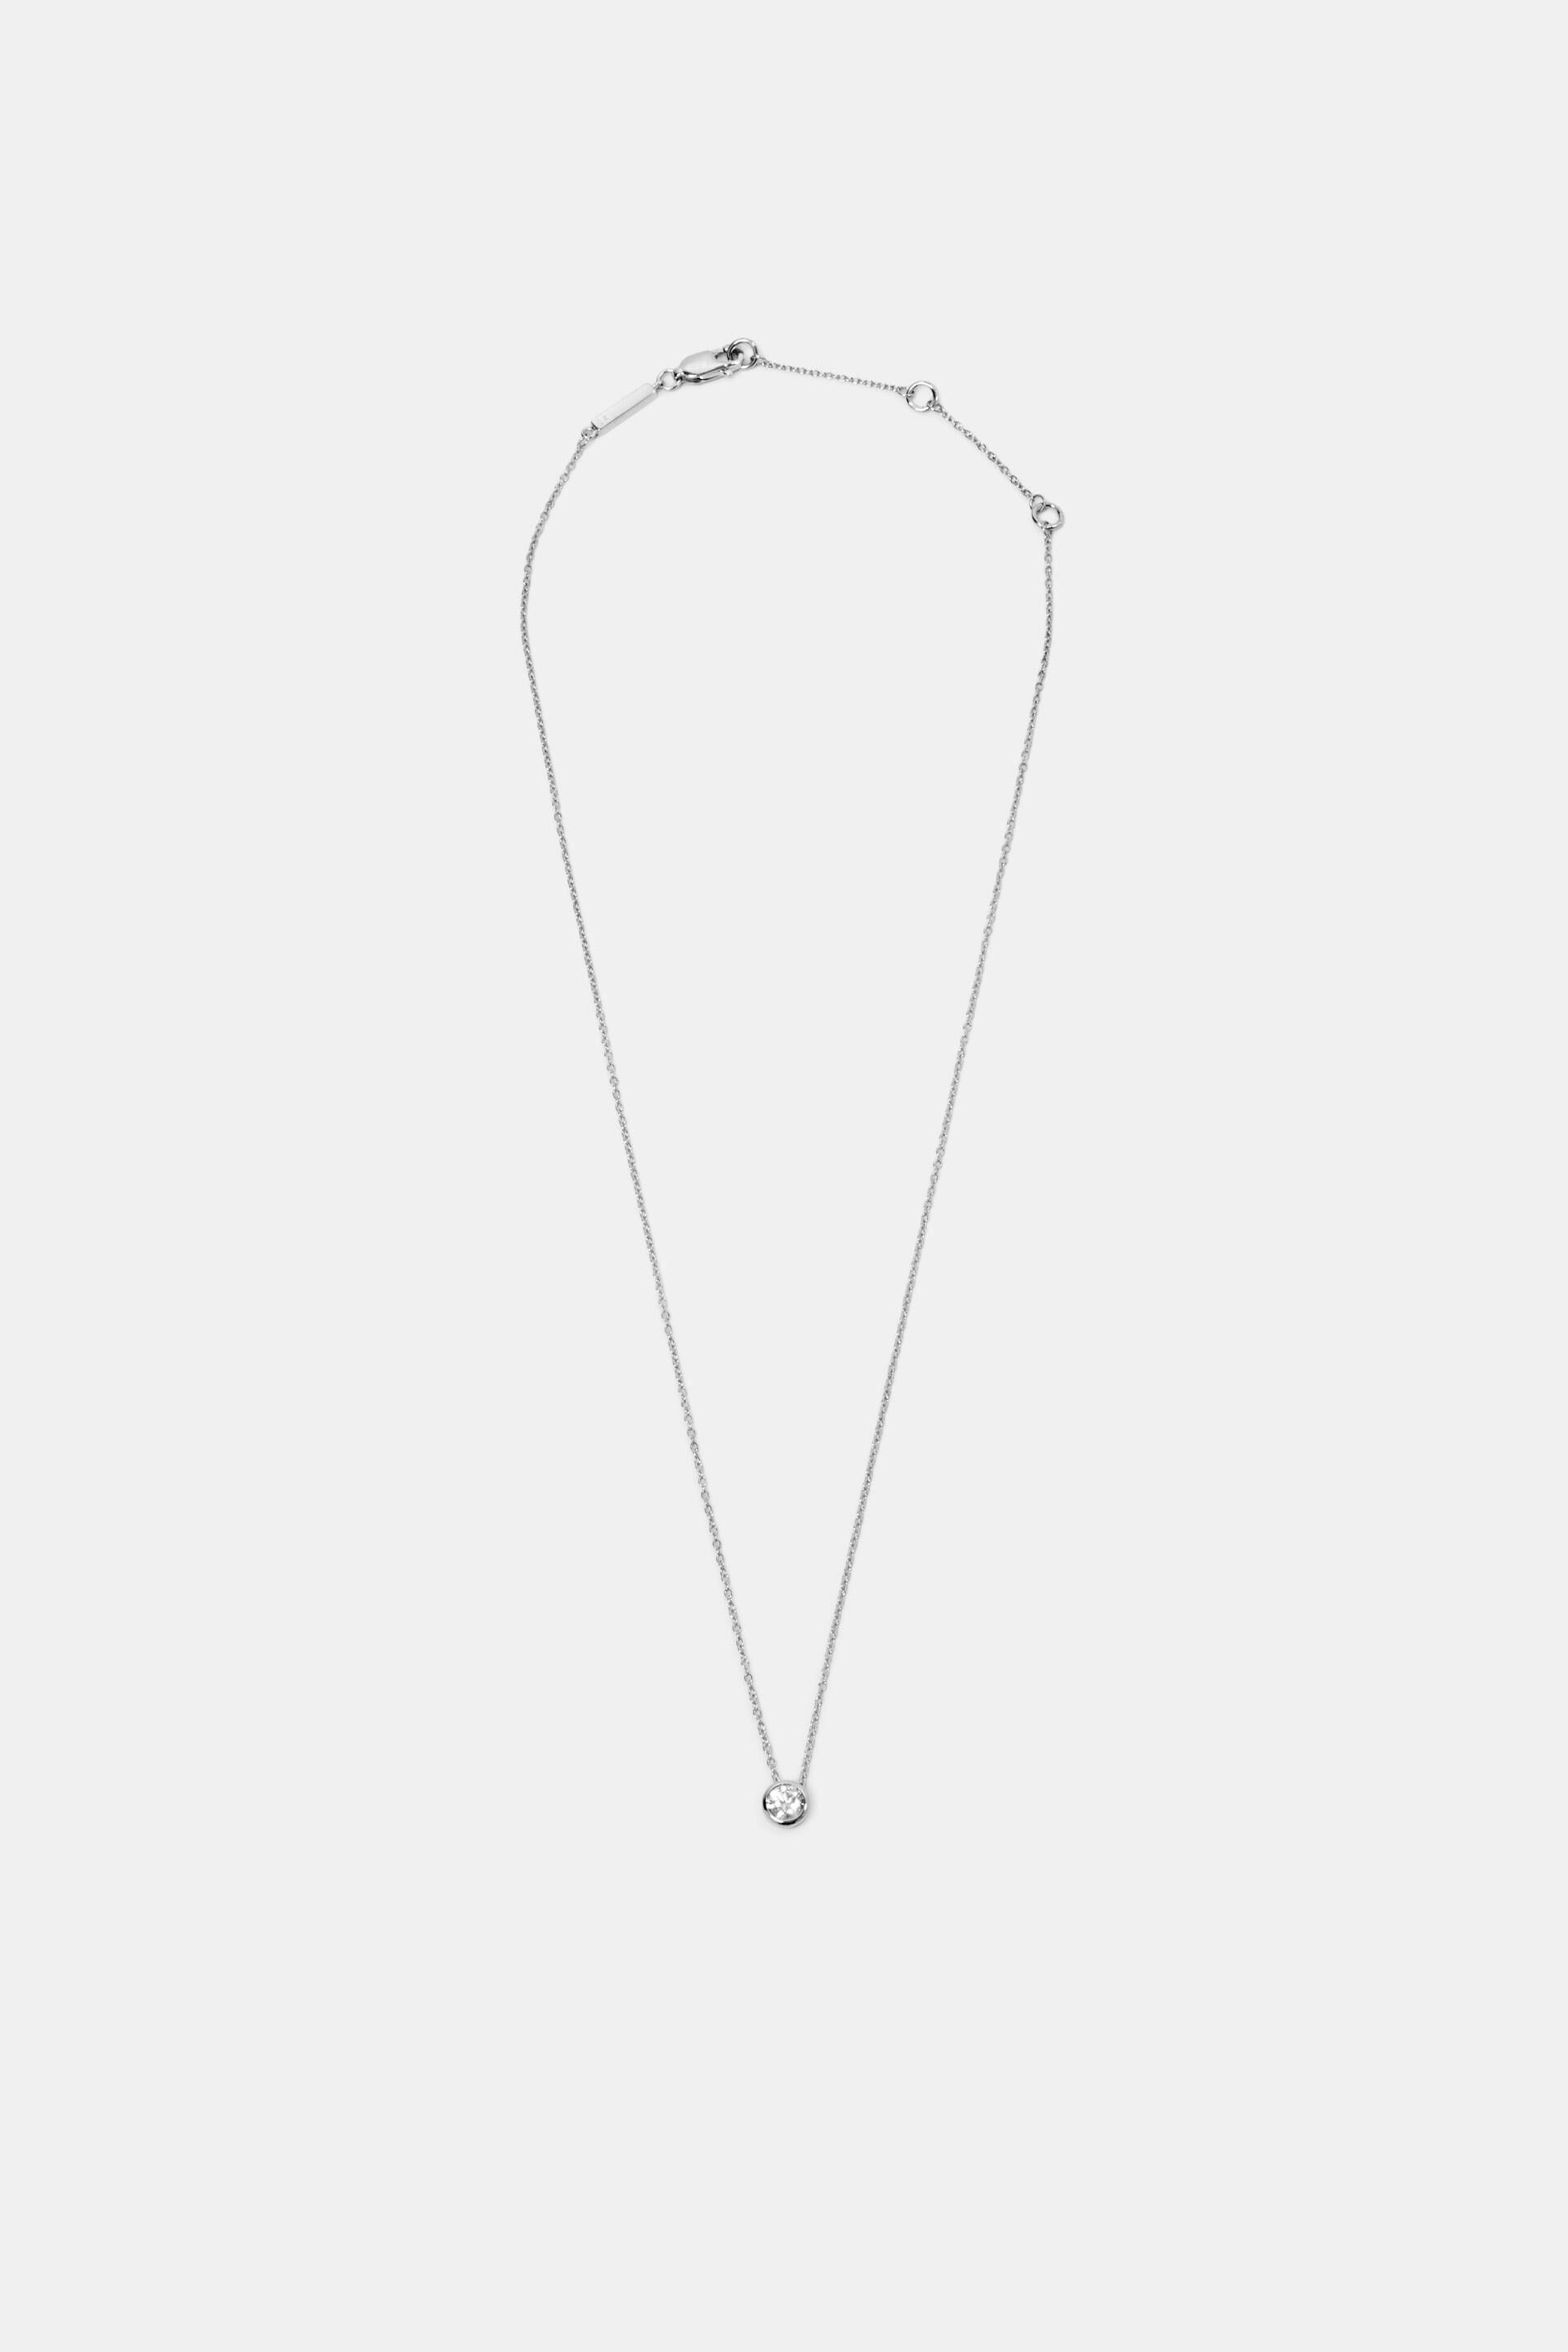 Esprit Necklace silver zirconia, with sterling